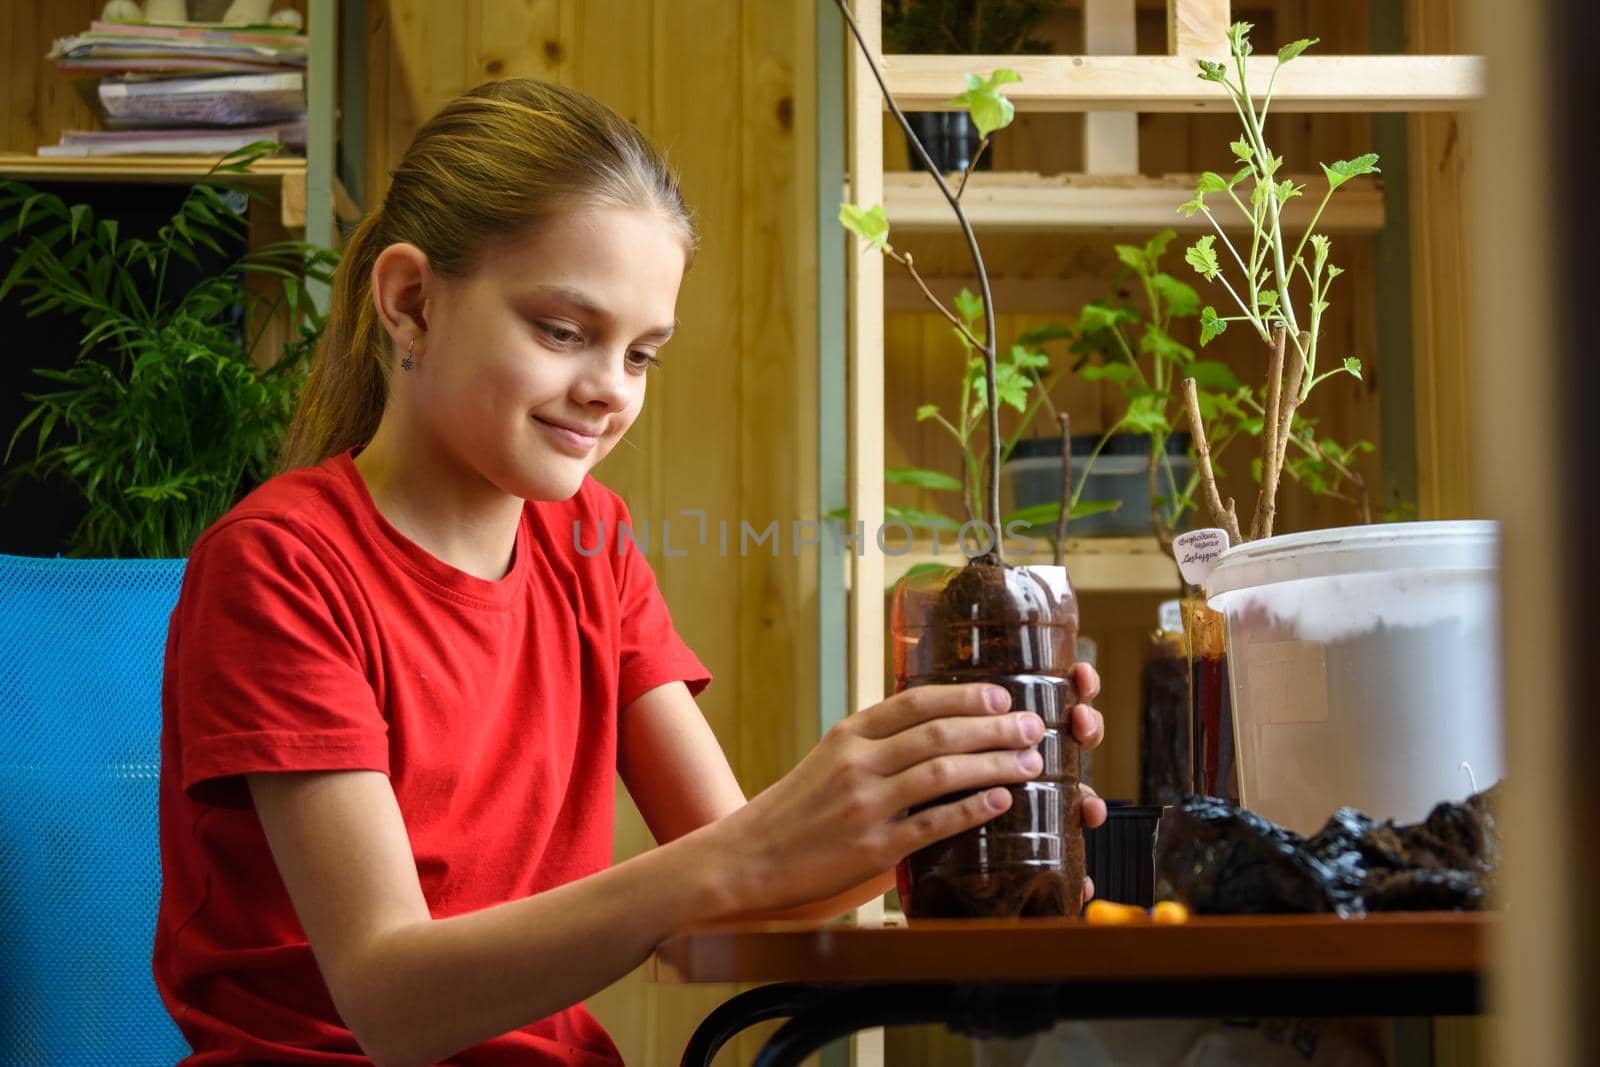 A girl in a country house setting transplants seedlings of garden plants into plastic bottles by Madhourse